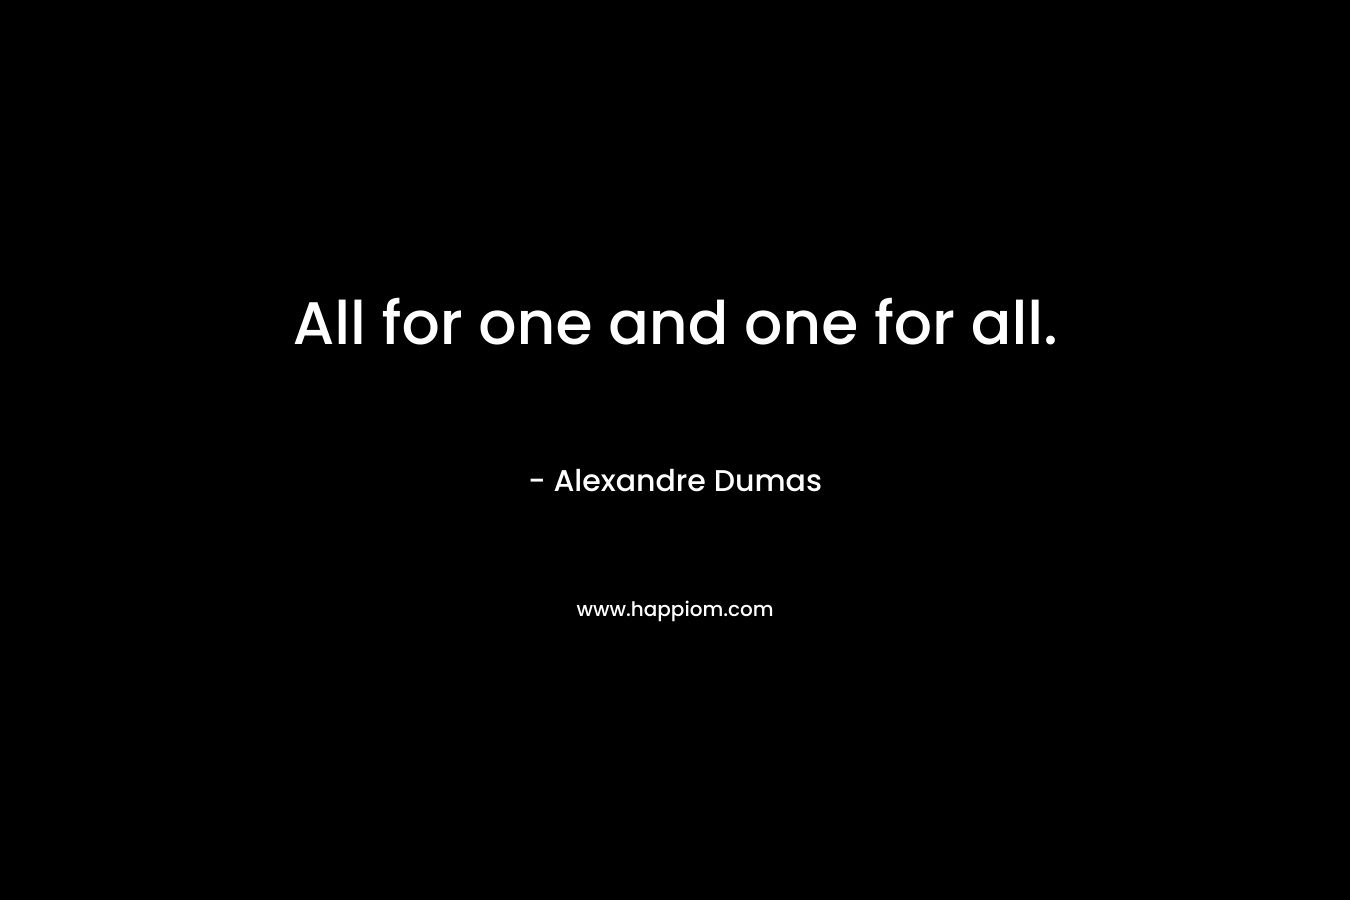 All for one and one for all. – Alexandre Dumas